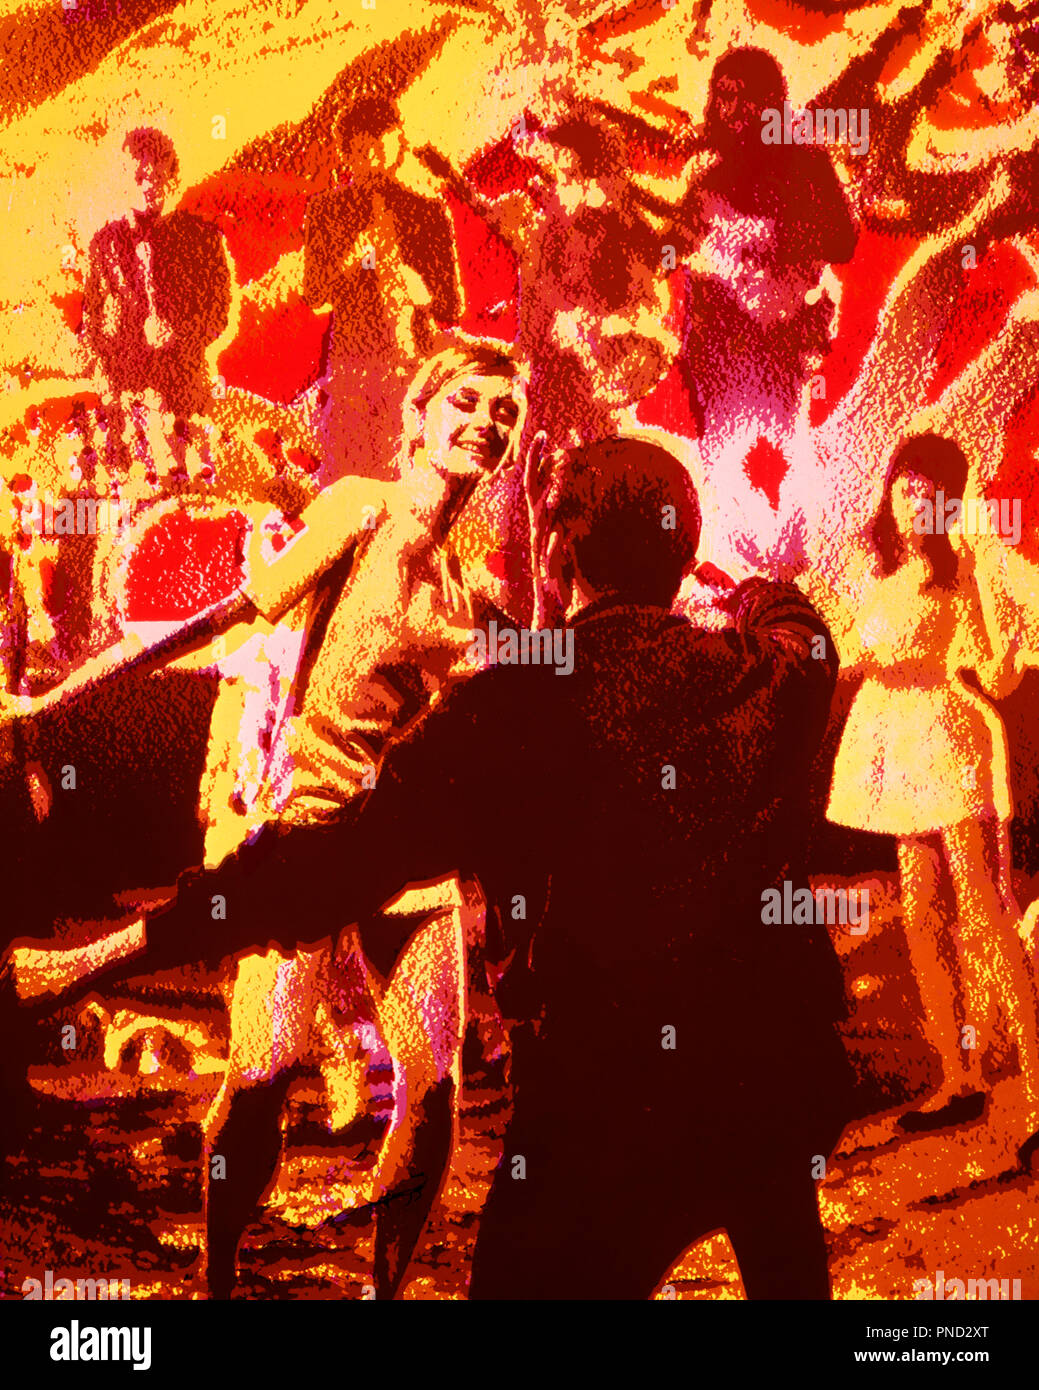 12/11/1975 1960s 1970s COUPLE DANCING BAND IN BACKGROUND WITH MUSICAL INSTRUMENTS INDOOR SOLARIZED DISCO MAN WOMAN - kd2861 PHT001 HARS NOSTALGIA MOVING OLD FASHION INSTRUMENTS SEXY NIGHTCLUB WILD MOVEMENT JOY LIFESTYLE MUSICIAN CELEBRATION FEMALES GROWNUP MOTION 6 FULL-LENGTH PERSONS GROWN-UP TRENDY STRINGS ENTERTAINMENT MOVE MEN AND WOMEN MUSICIANS DANCES HAPPINESS MATES LEISURE MATE PSYCHEDELIC AND COMPOSITE EXCITEMENT LOUD TREND MAN AND WOMAN DANCE FLOOR 6 STRING K SMILES 6 STRINGS MUSICAL INSTRUMENT DISCOS DISCOTHEQUES ORCHESTRAS CONCEPTUAL MANLY STYLISH GUITARISTS MUSICAL INSTRUMENTS Stock Photo